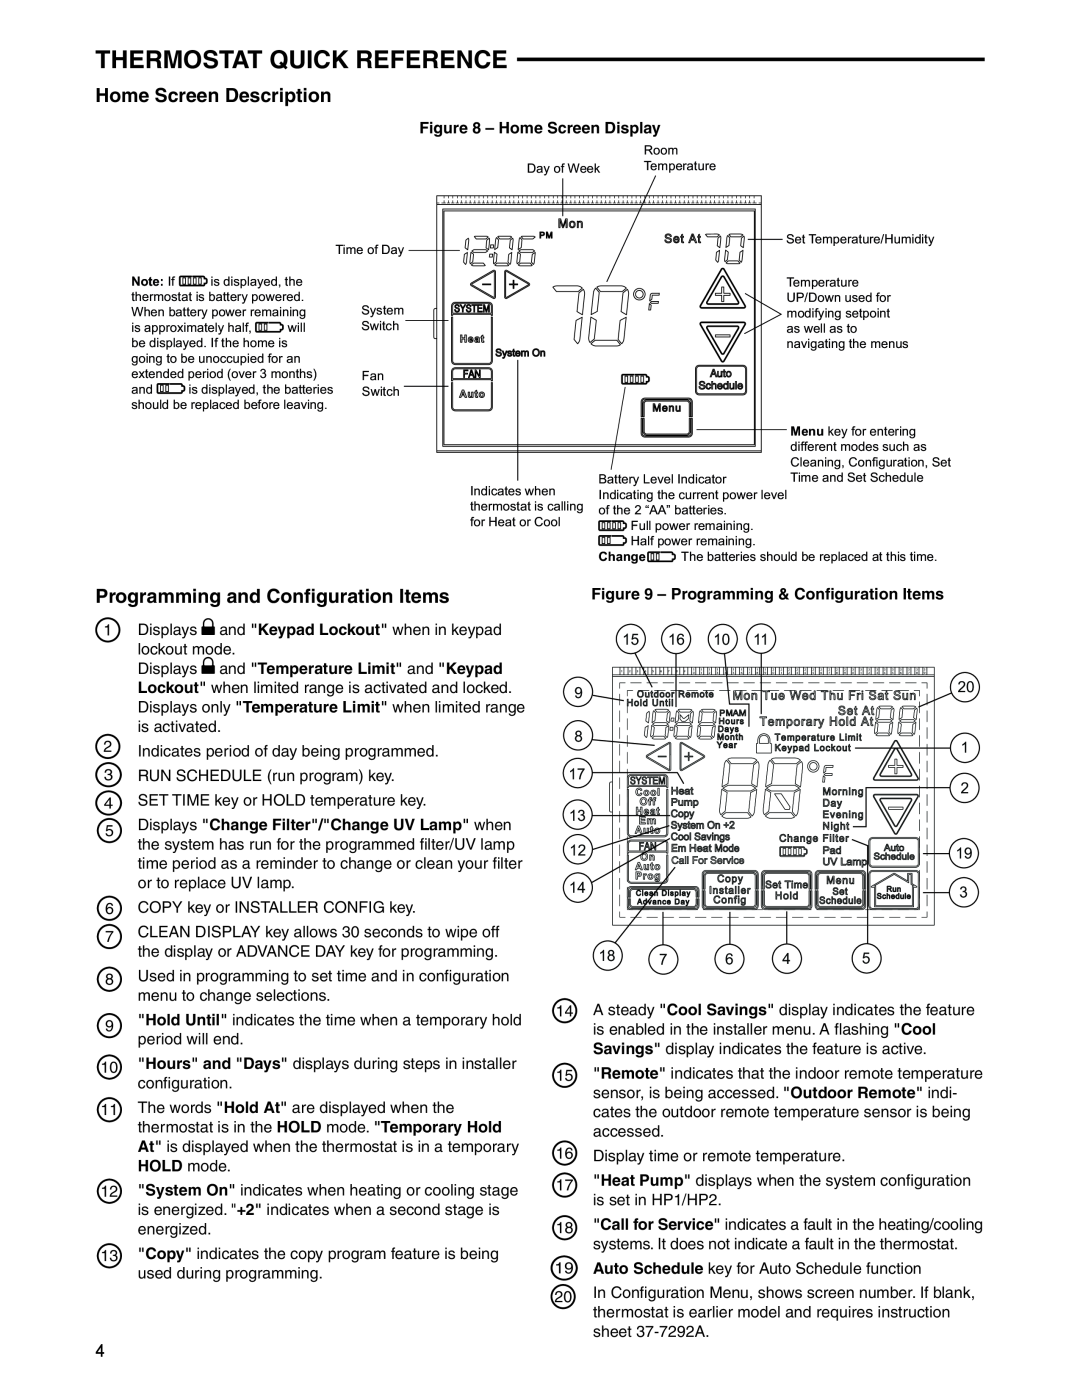 White Rodgers 1F95-1280 Thermostat Quick Reference, Home Screen Description, Programming and Configuration Items 